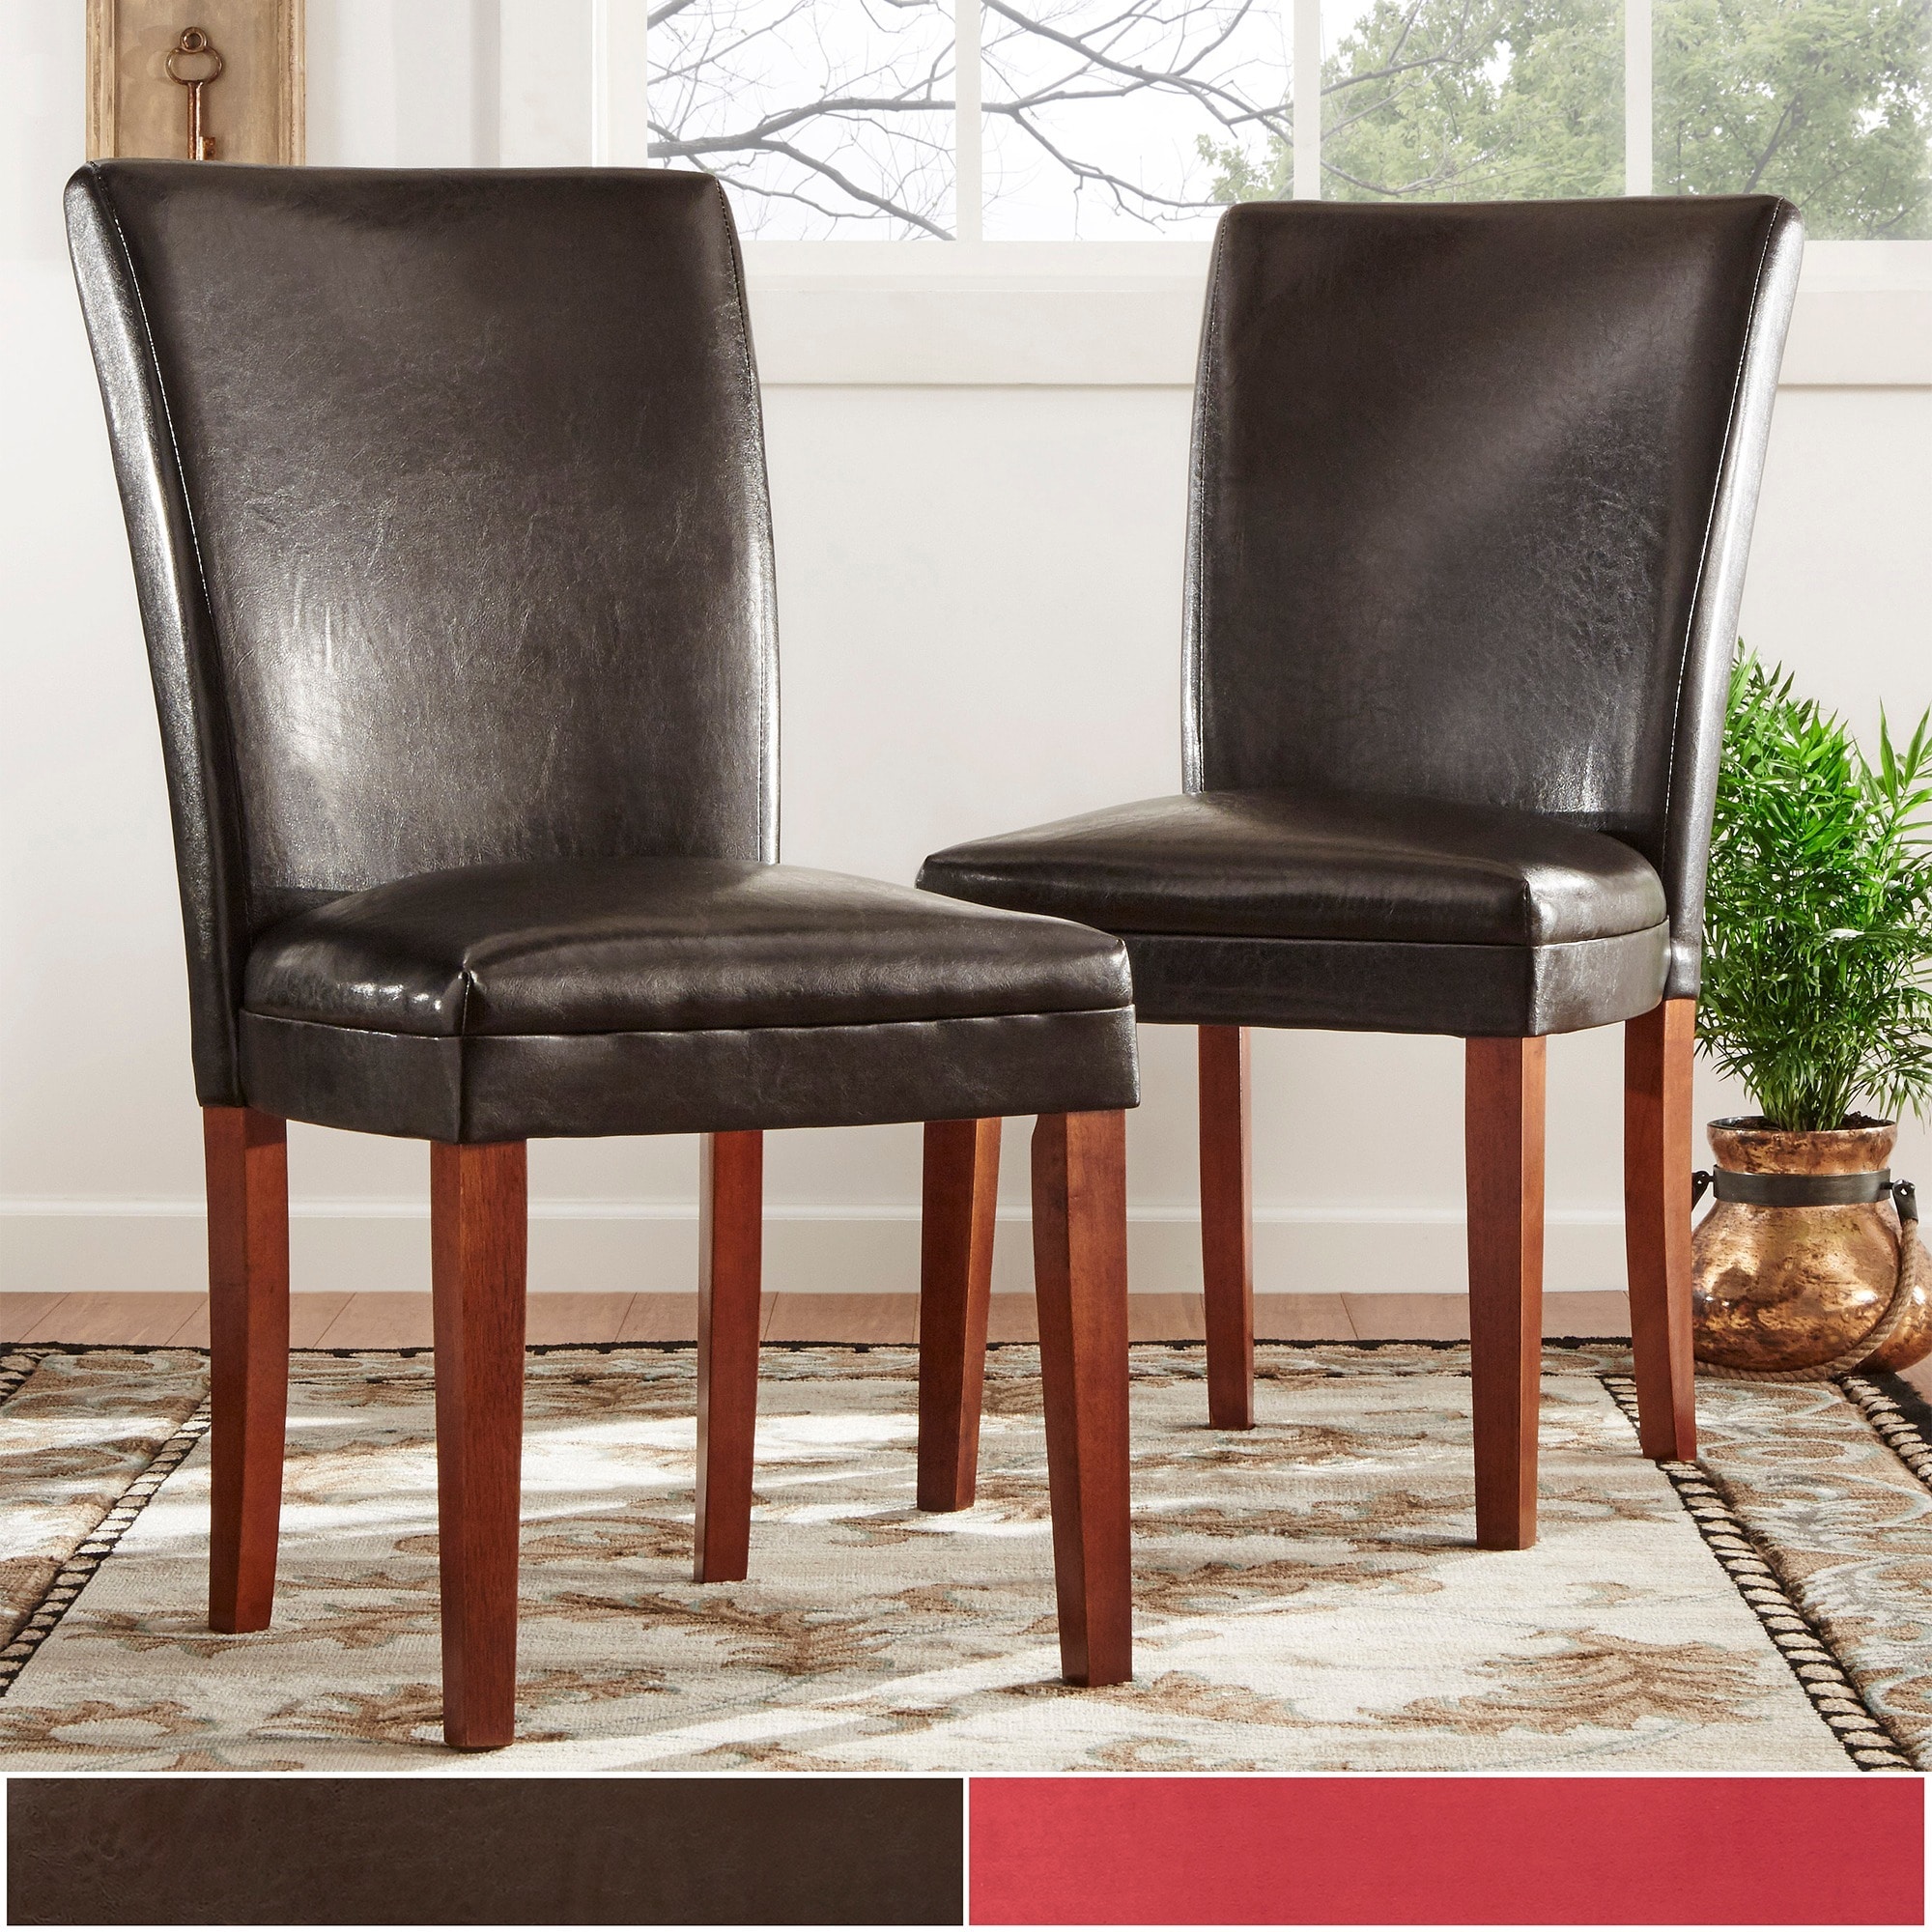 Parson Faux Leather Dining Chairs Set Of 2 By Inspire Q Bold Dining Chair Overstock 4104696